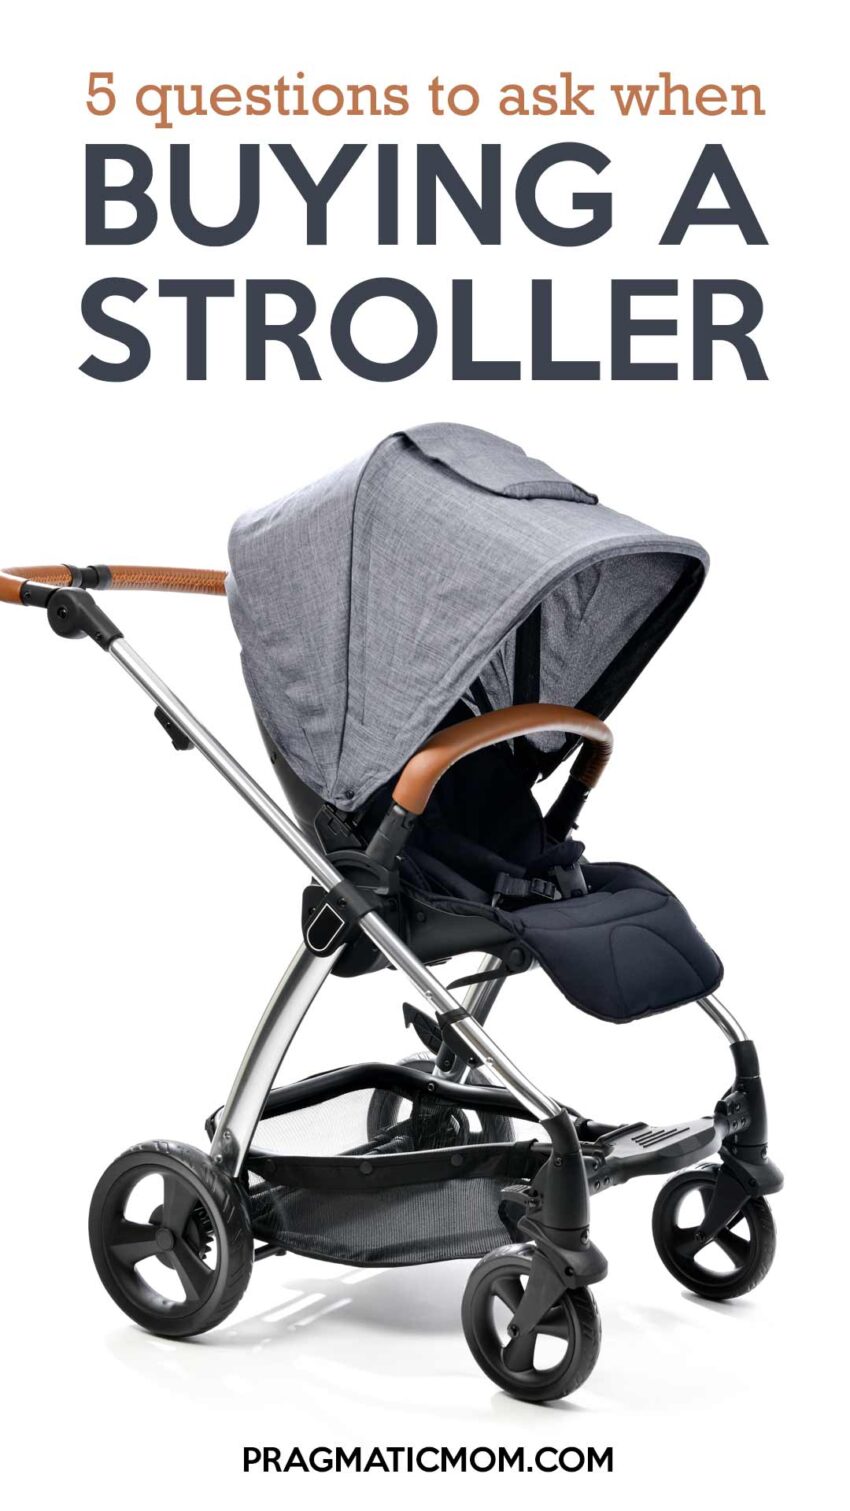 How to Purchase the Best Stroller for Your Family’s Needs